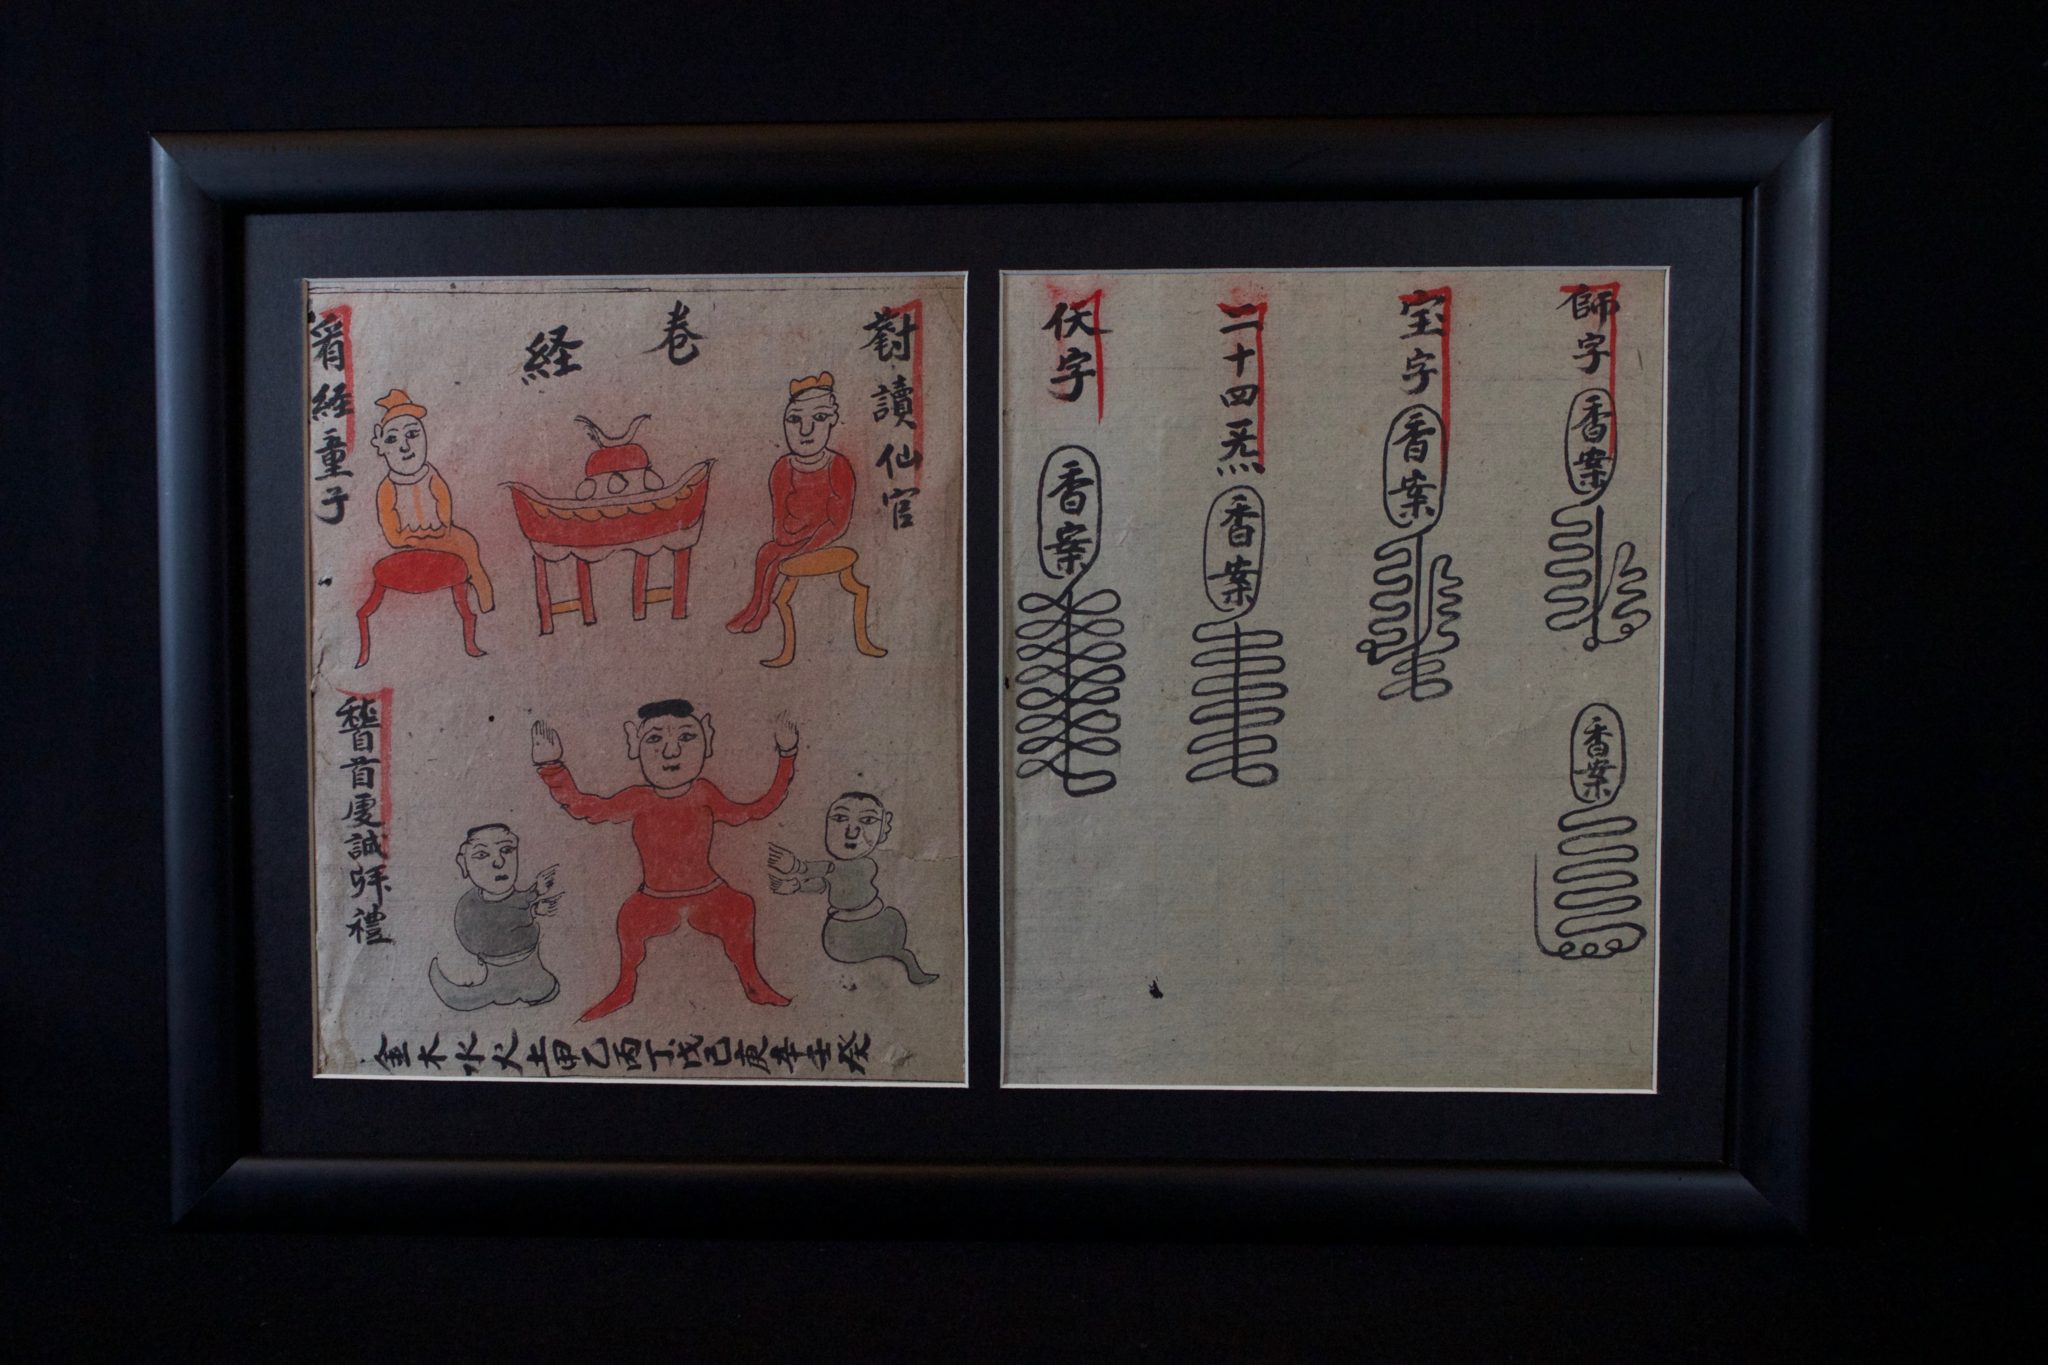 Pages from a Shamanic Book, Vietnam, Cao Lan people, Mid 20th c, Ink and watercolor handwritten on Mulberry paper, It is a book for making astrological predictions using the East Asian zodiac’s twelve animal characters. The text of the book uses images, maps and text to describe in detail, for the learned shaman, how to navigate this complex system of looking into the future. 12” x 17 ¾” x ¾”, $260.